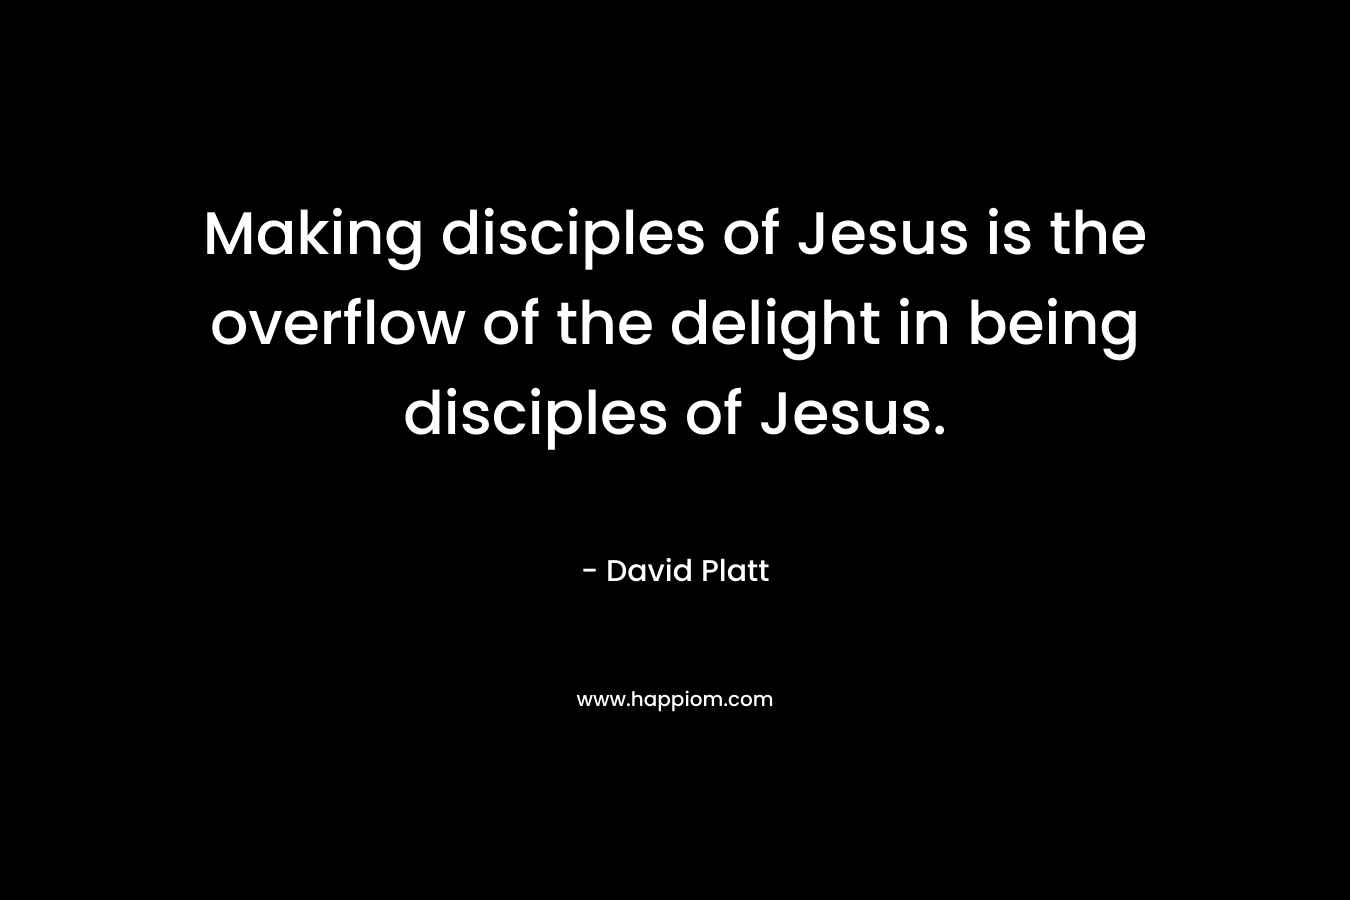 Making disciples of Jesus is the overflow of the delight in being disciples of Jesus.